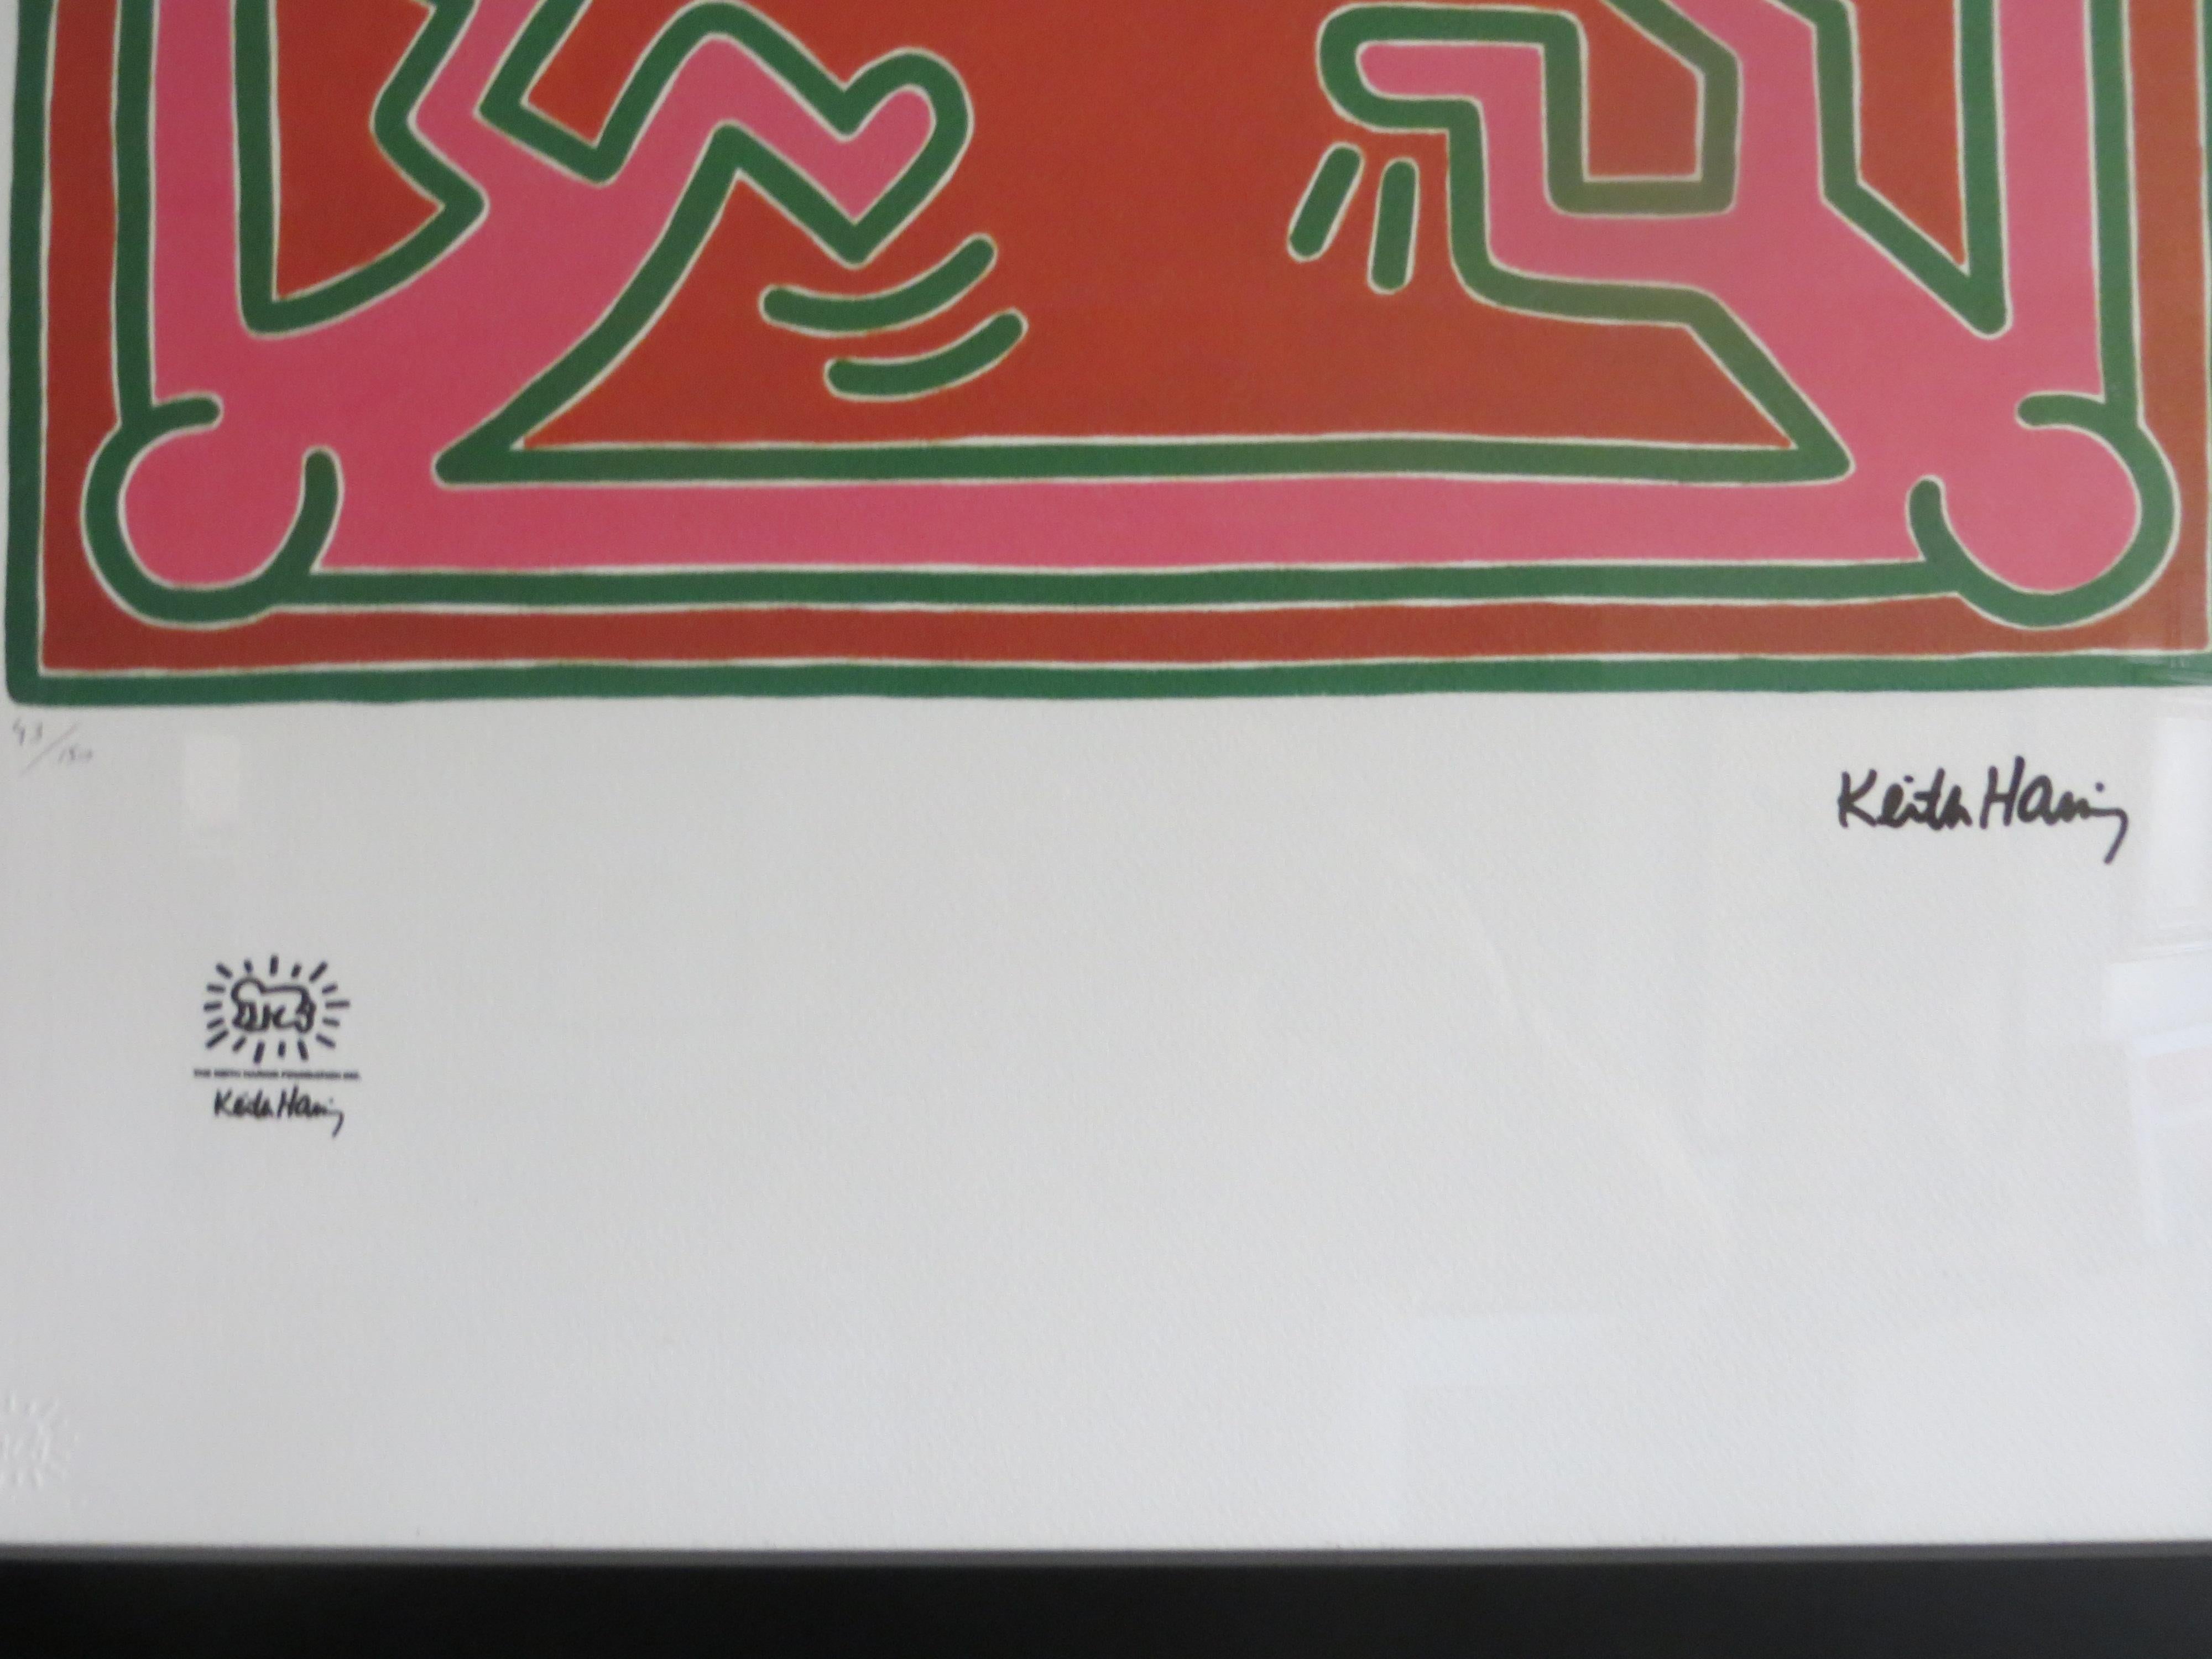   After Keith Haring,  Lithograph, Numbered  43/150 - Pop Art Print by (after) Keith Haring